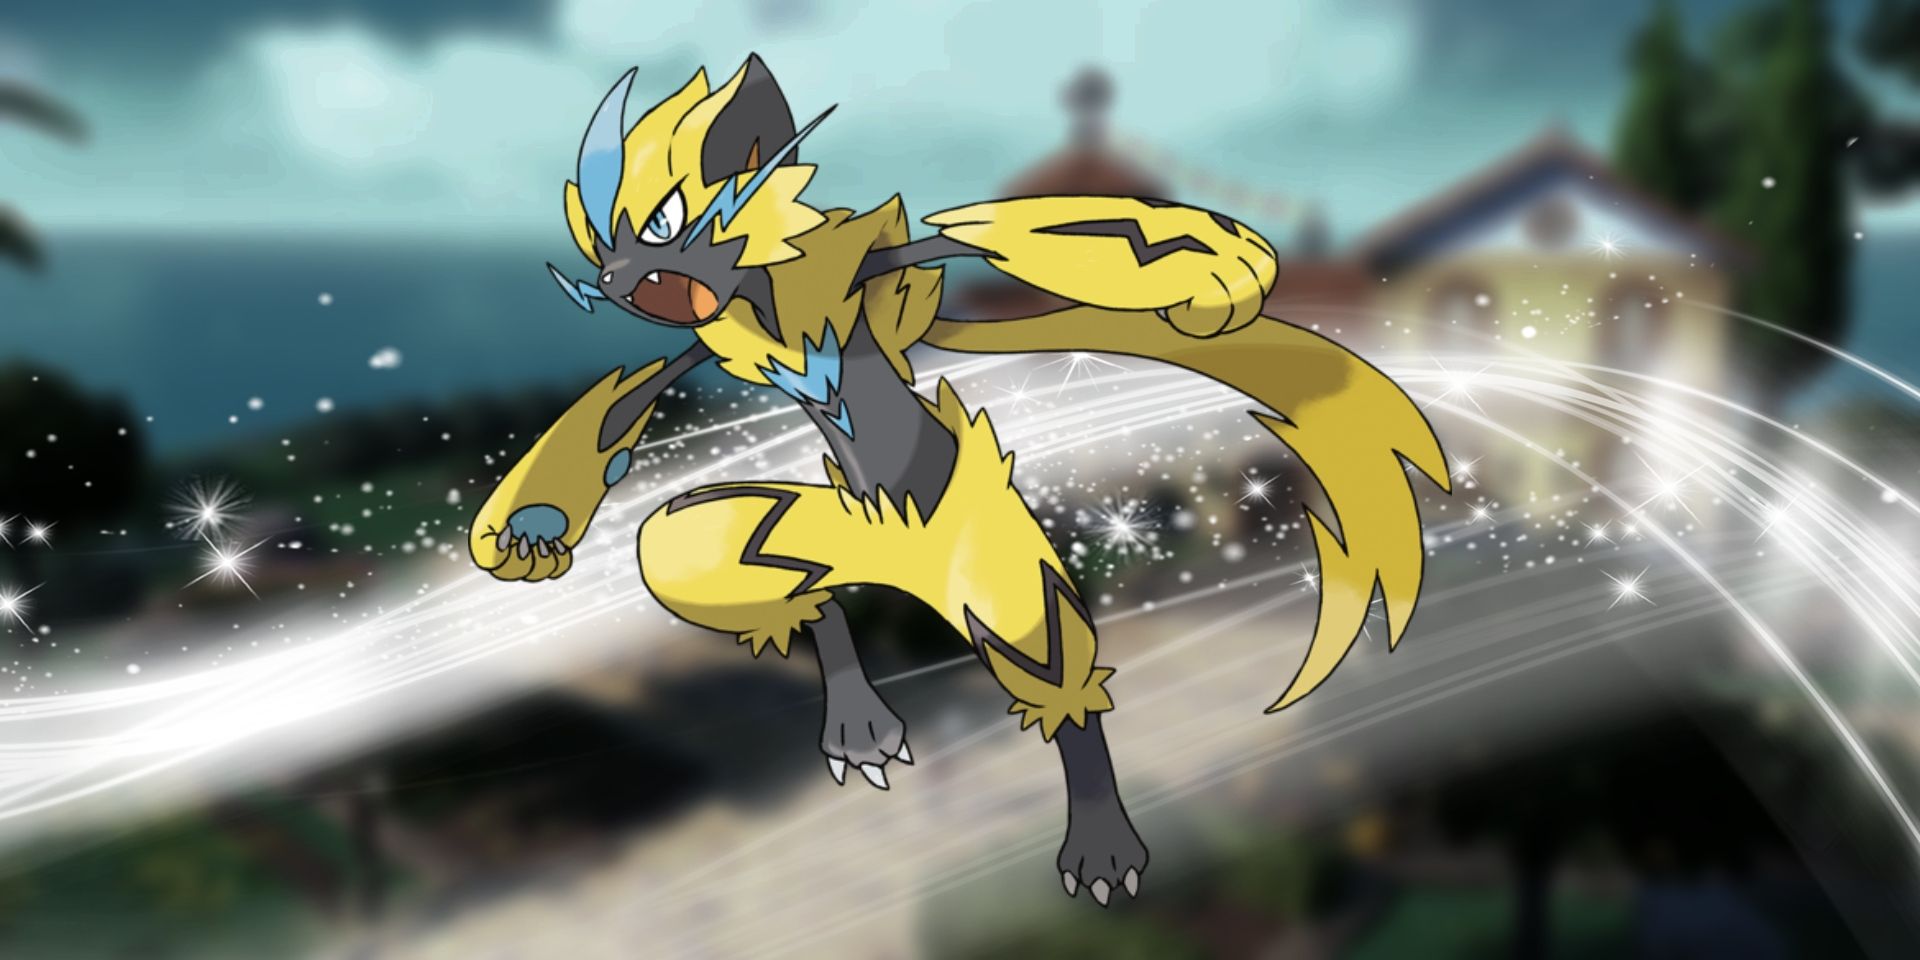 Pokemon's Zeraora in the middle. Behind it is a white flowing and sparkling effect.